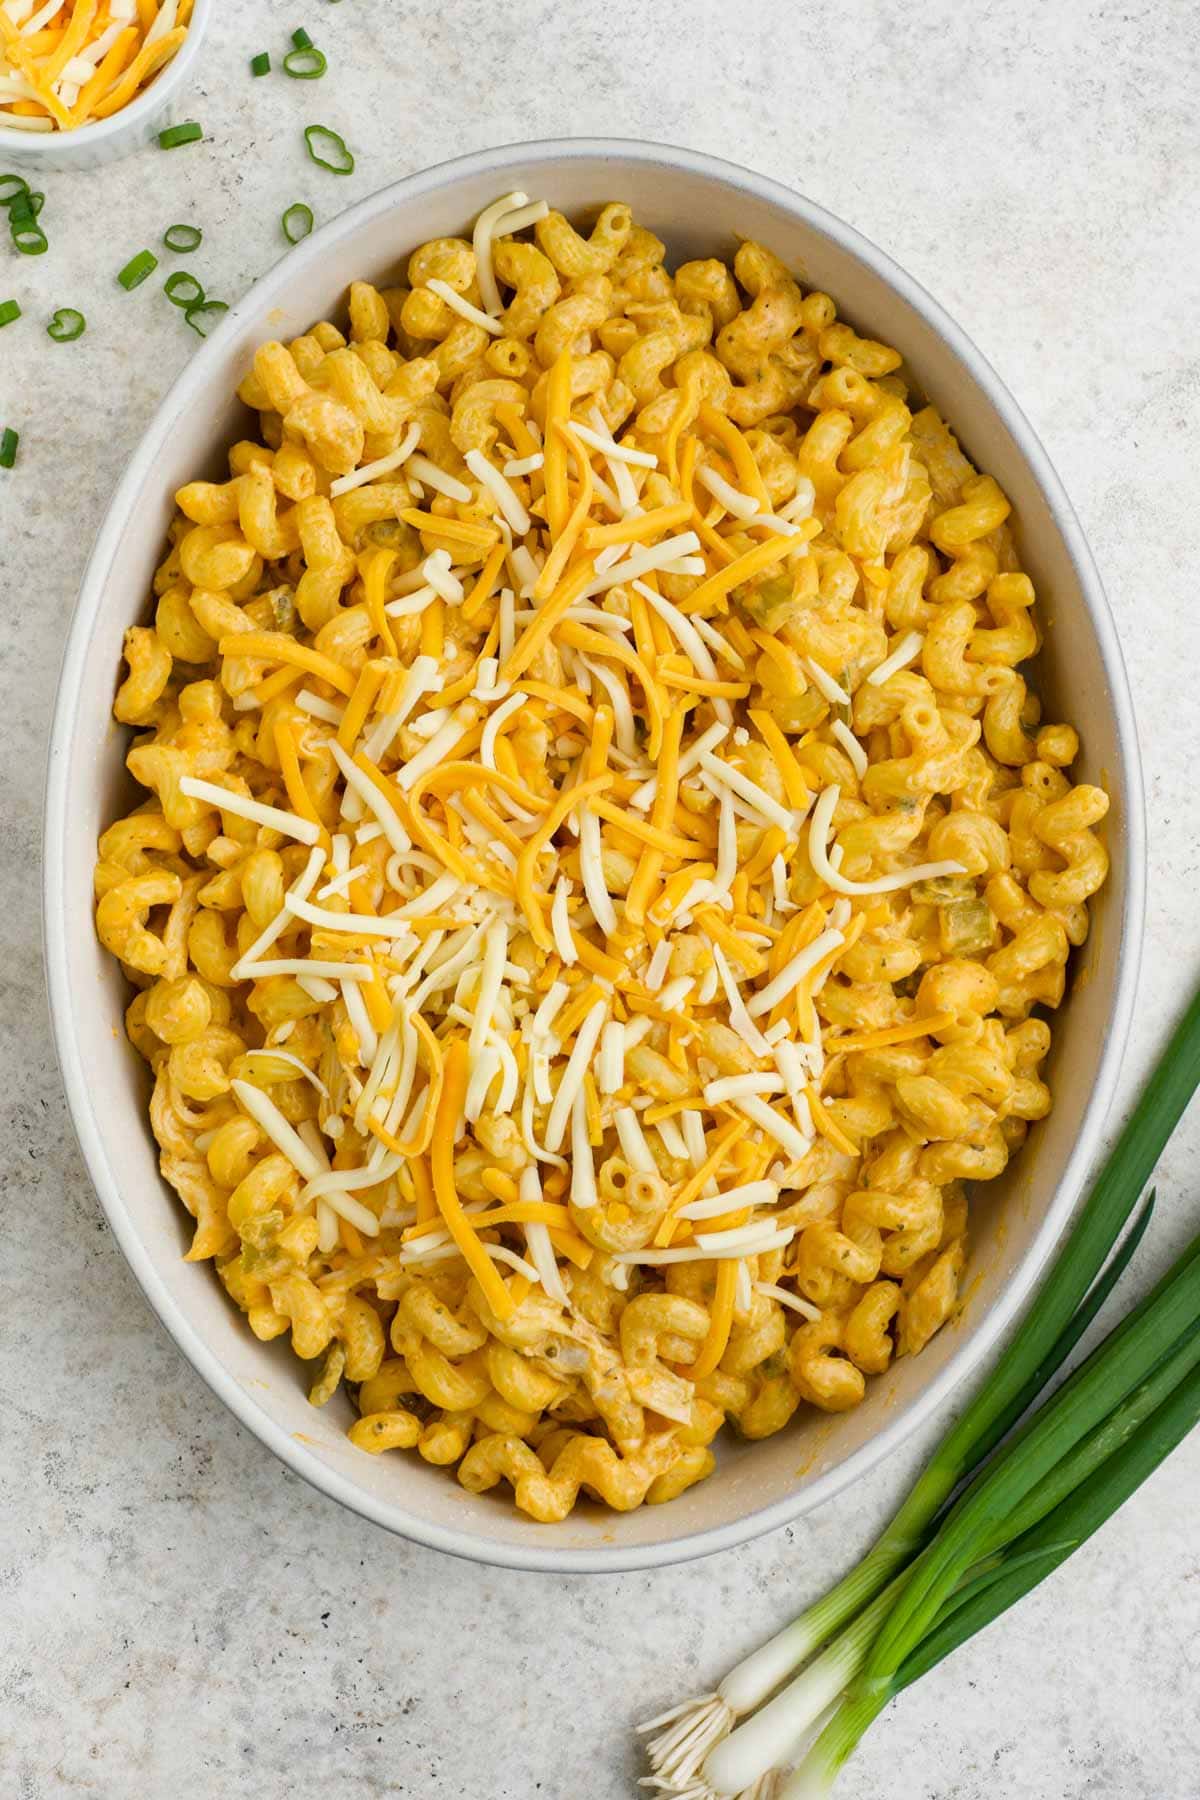 Pasta with cheese and chicken in a baking dish.